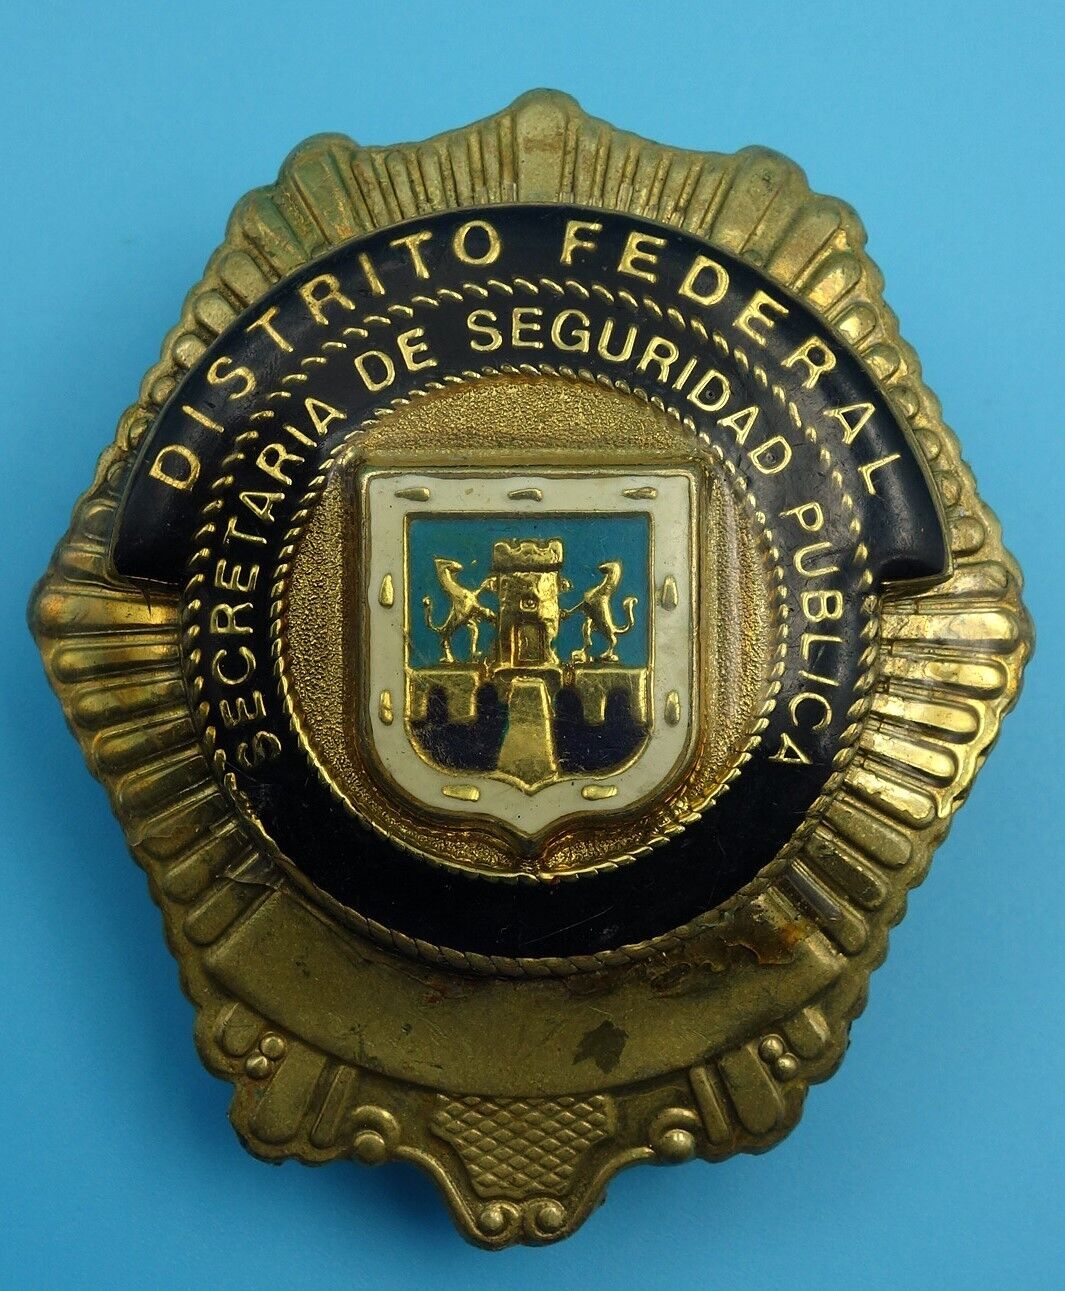 Q57, OBSOLETE Distrito Federal - Mexican Police badge, Numbered